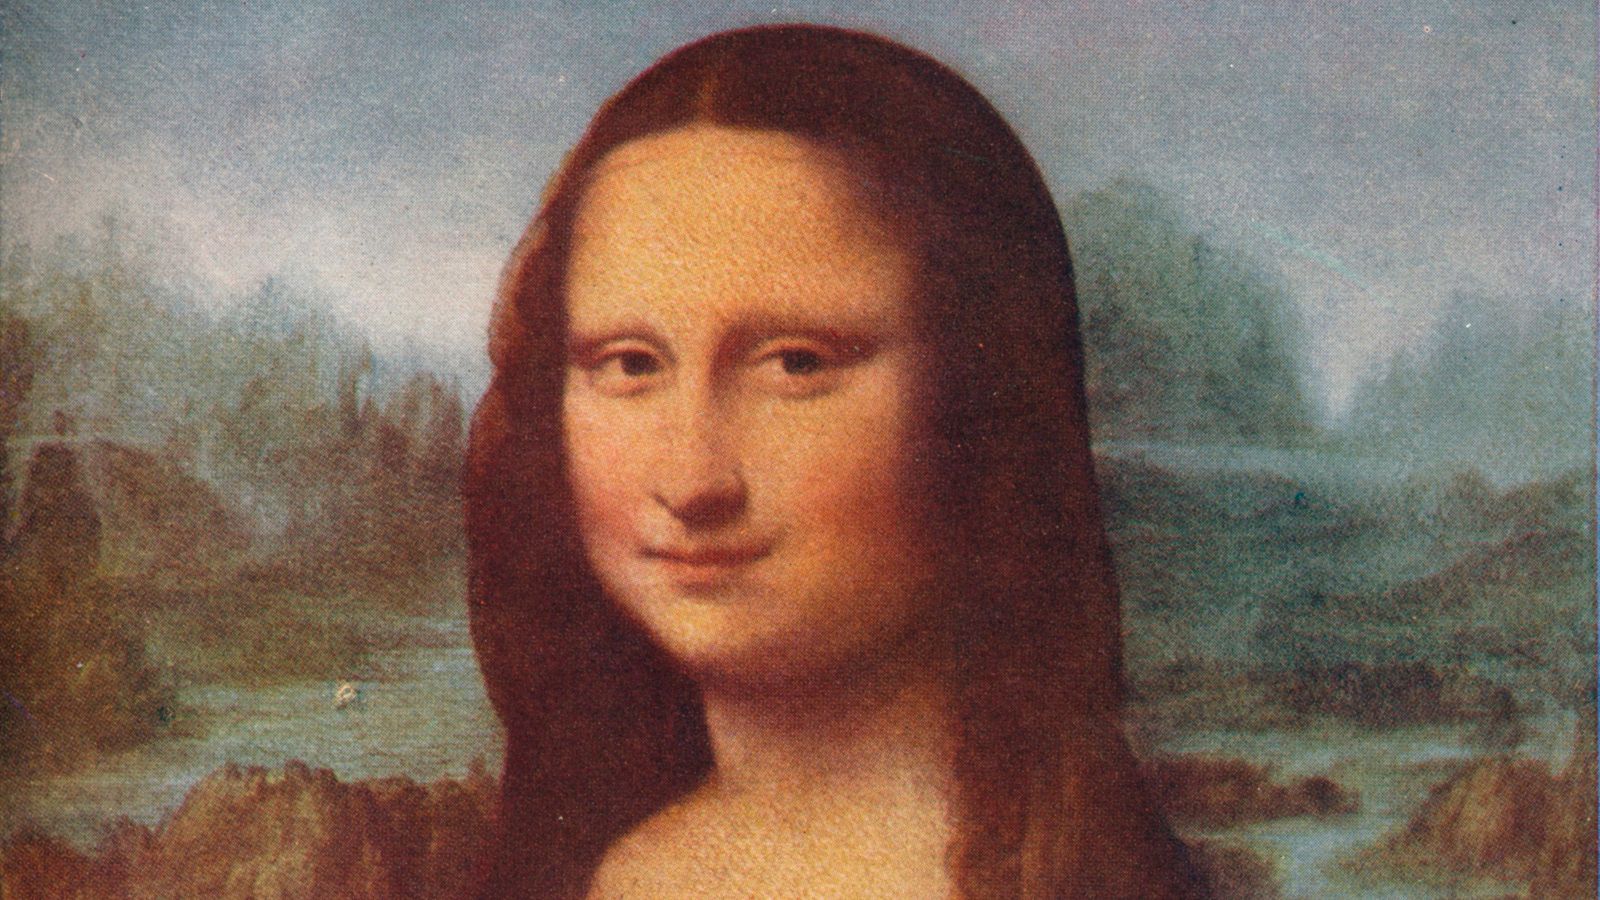 COVID-19: Louvre puts personal time with Mona Lisa up for auction to